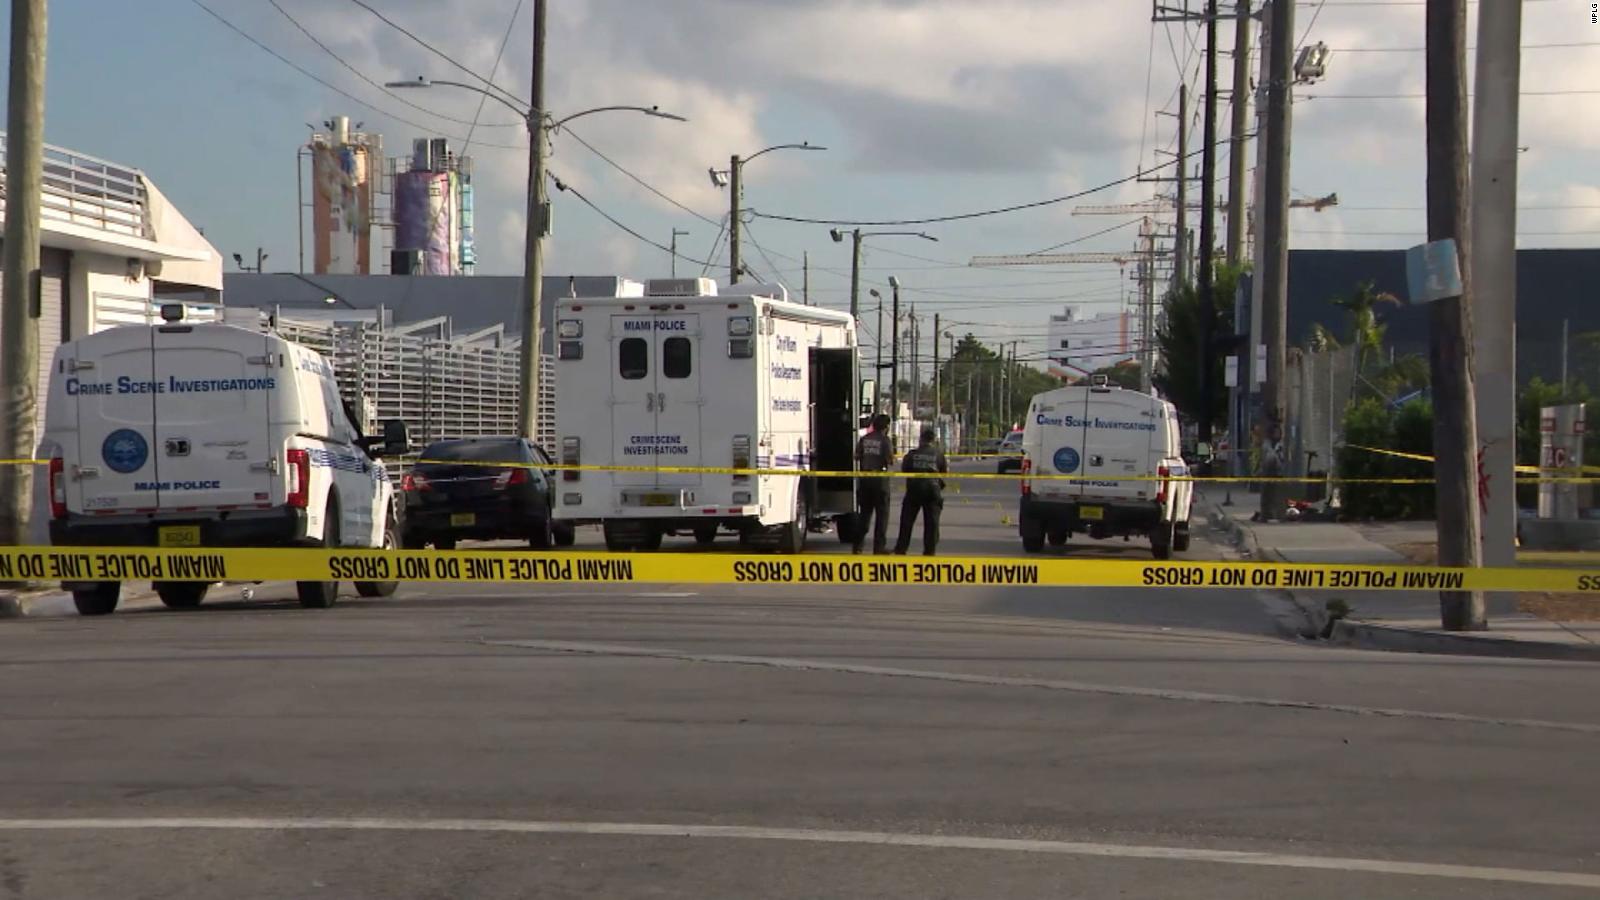 Miami shooting leaves 1 dead, 7 wounded - CNN